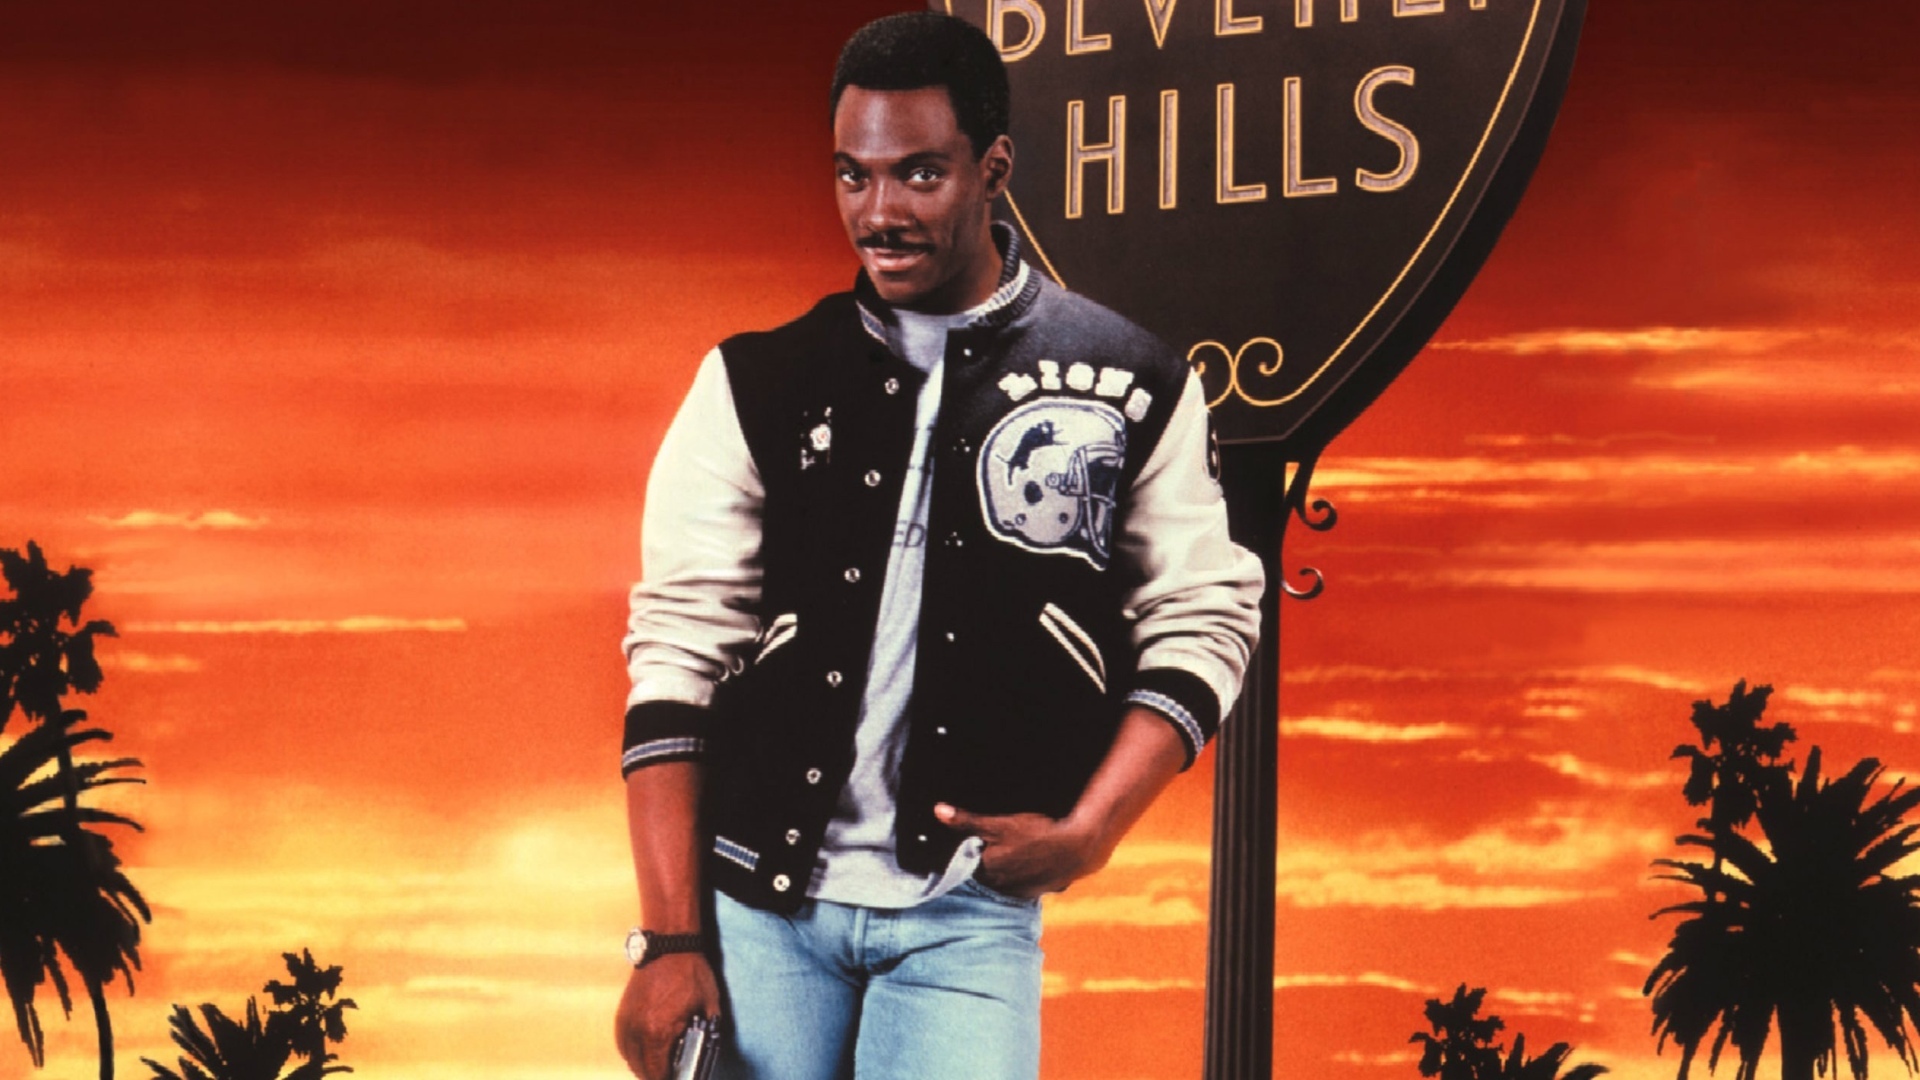 Movie Beverly Hills Cop HD Wallpaper | Background Image